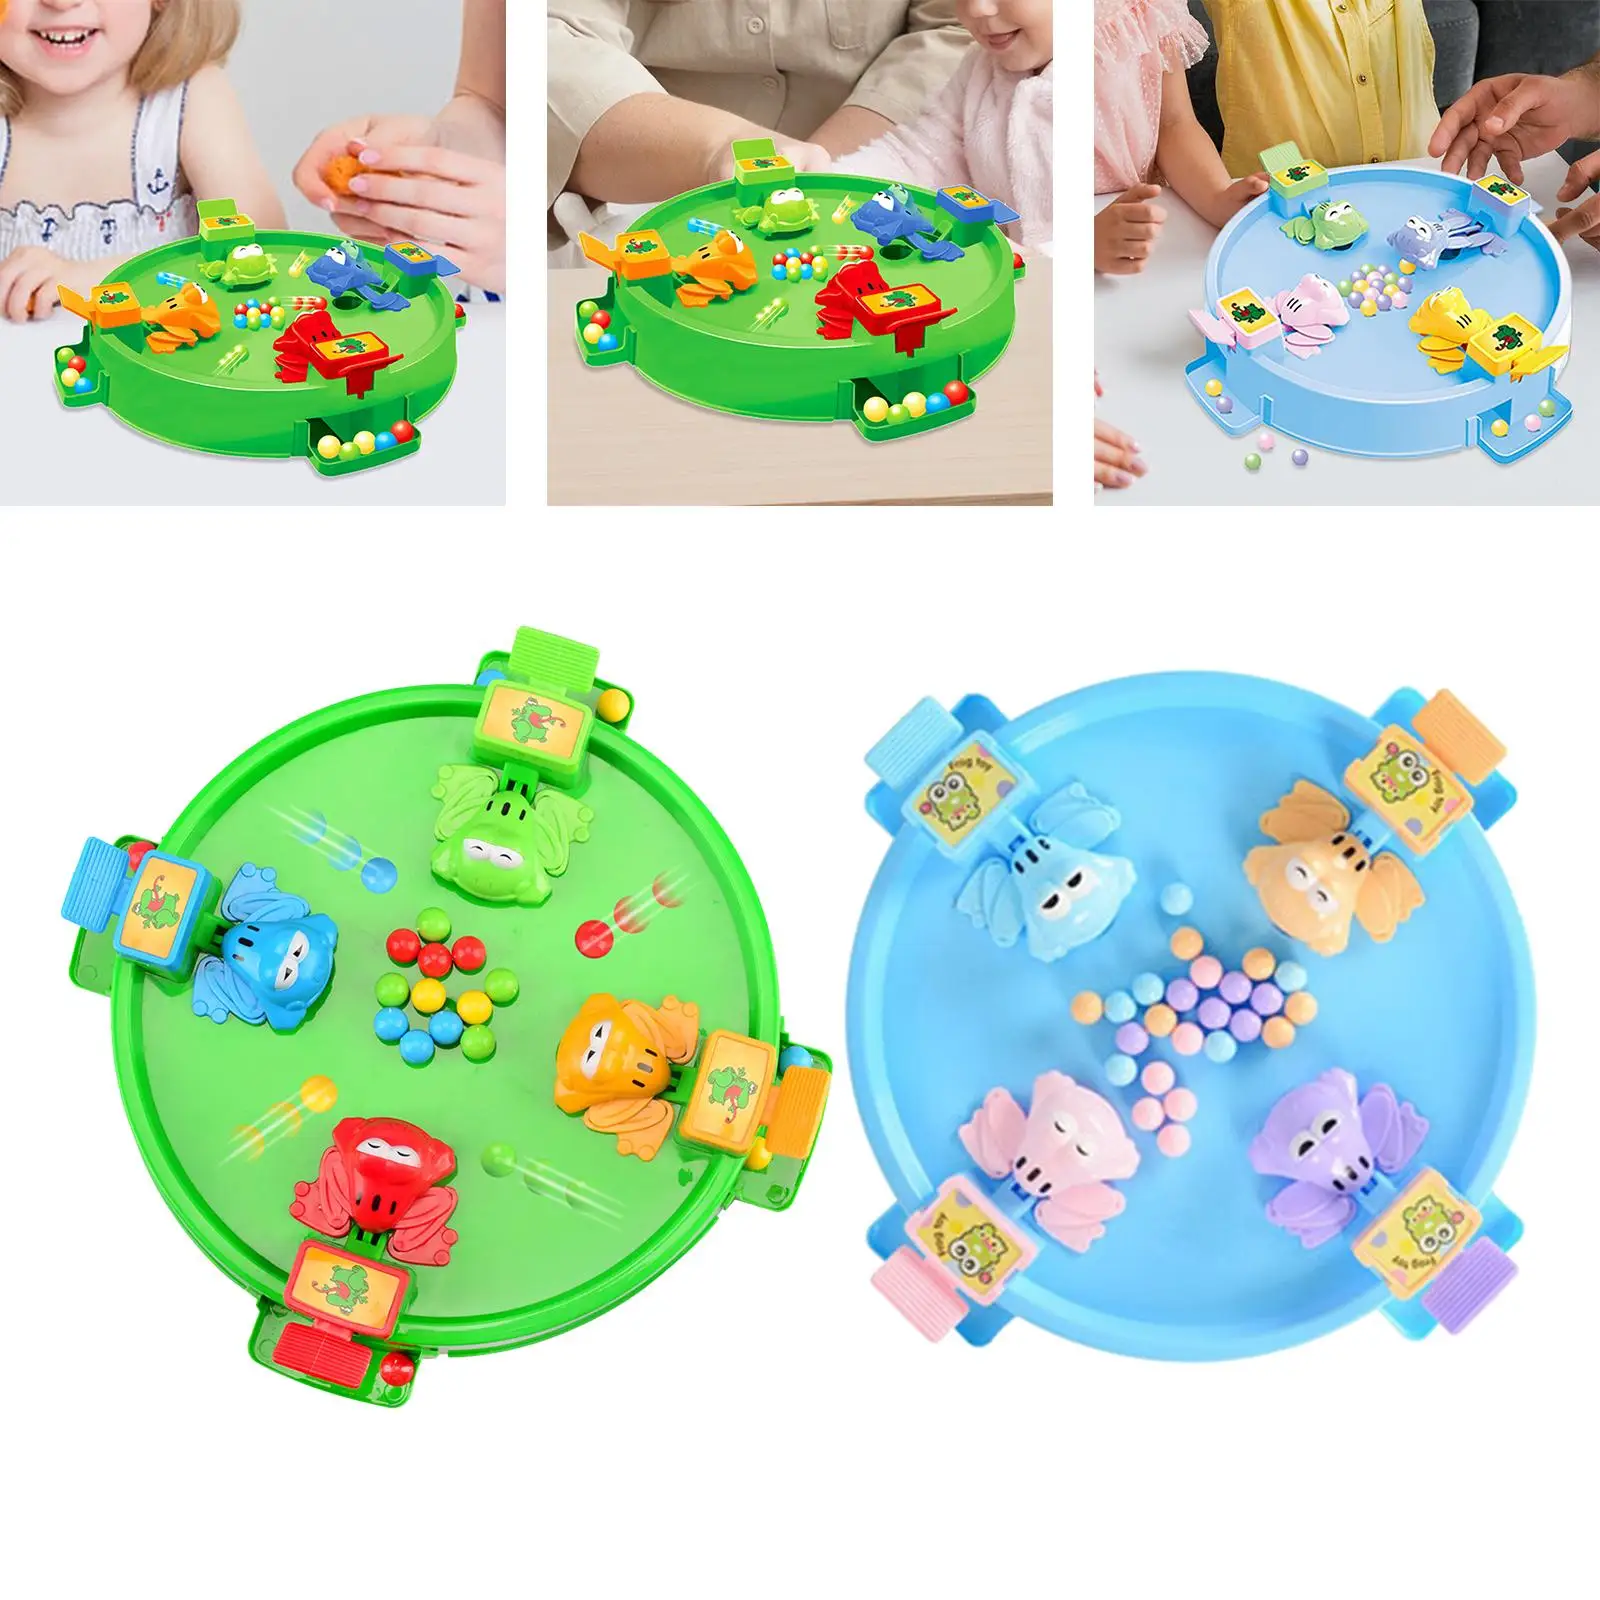 Puzzle Toy Parent Child Interaction Colorful Montessori Smooth Sensory Puzzle Board Game for Birthday Best Gifts Home Boys